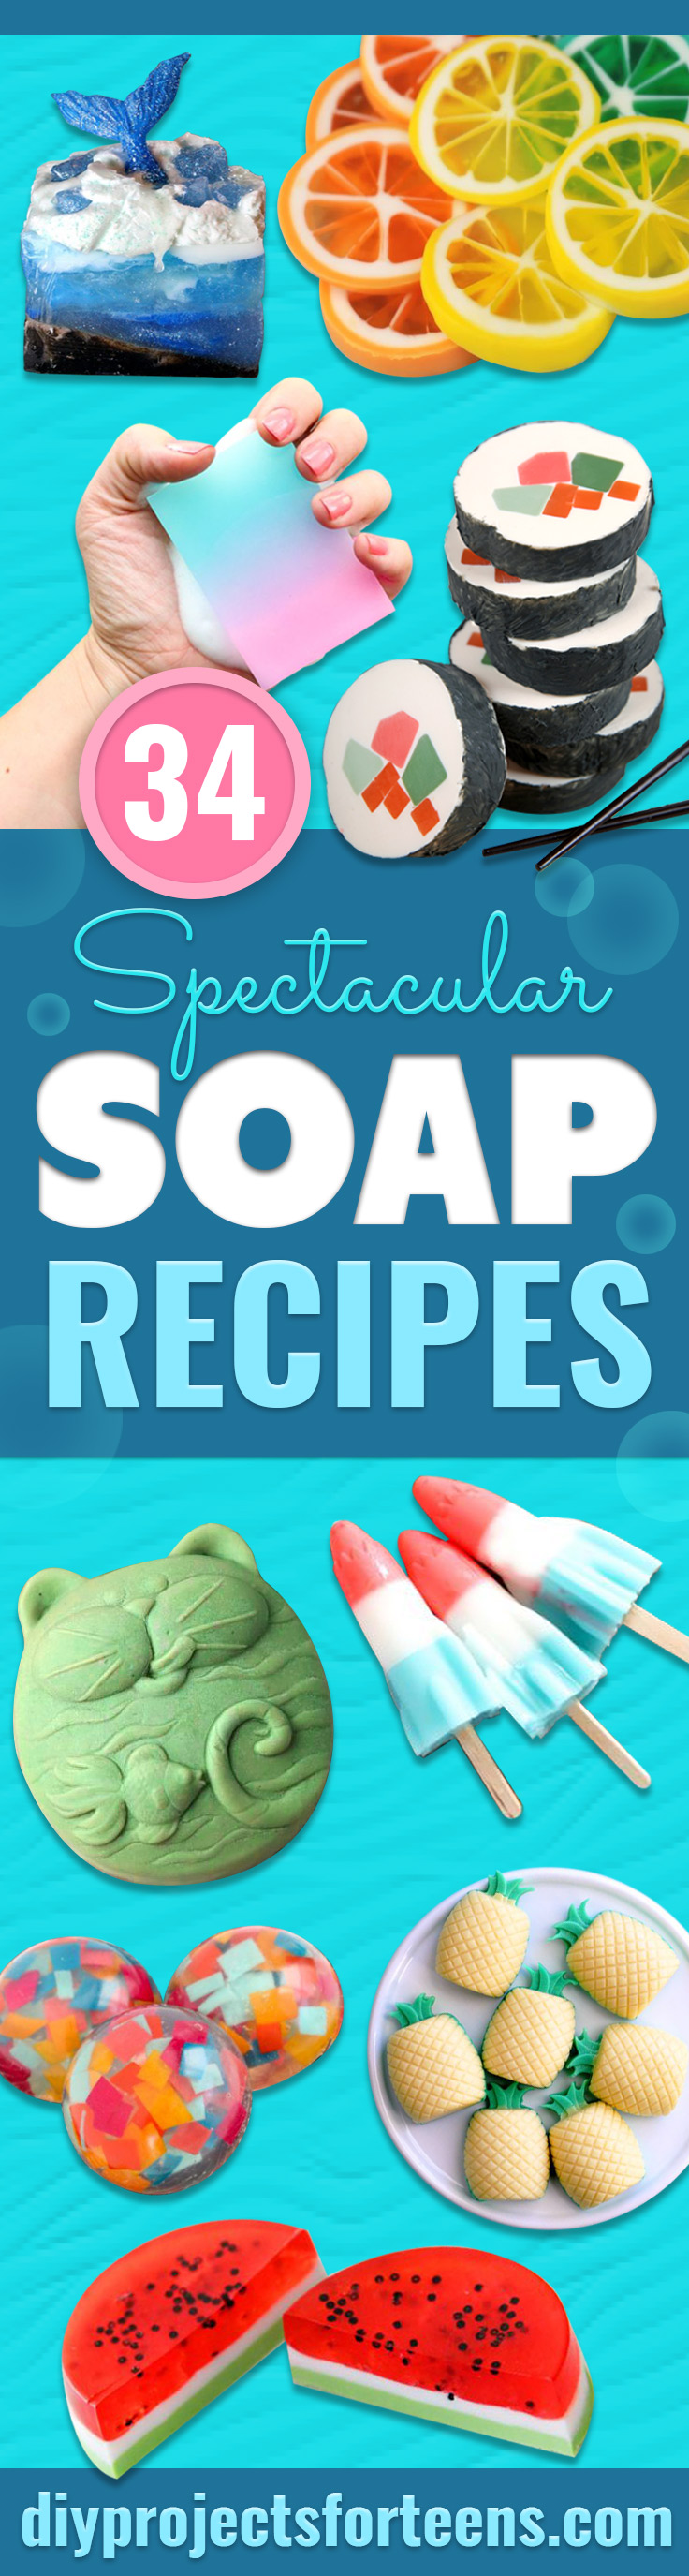 Soap Recipes DIY - DIY Soap Recipe Ideas - Best Soap Tutorials for Soap Making Without Lye - Easy Cold Process Melt and Pour Tips for Beginners - Crockpot, Essential Oils, Homemade Natural Soaps and Products - Creative Crafts and DIY for Teens, Kids and Adults #soaprecipes #diygifts #soapmaking